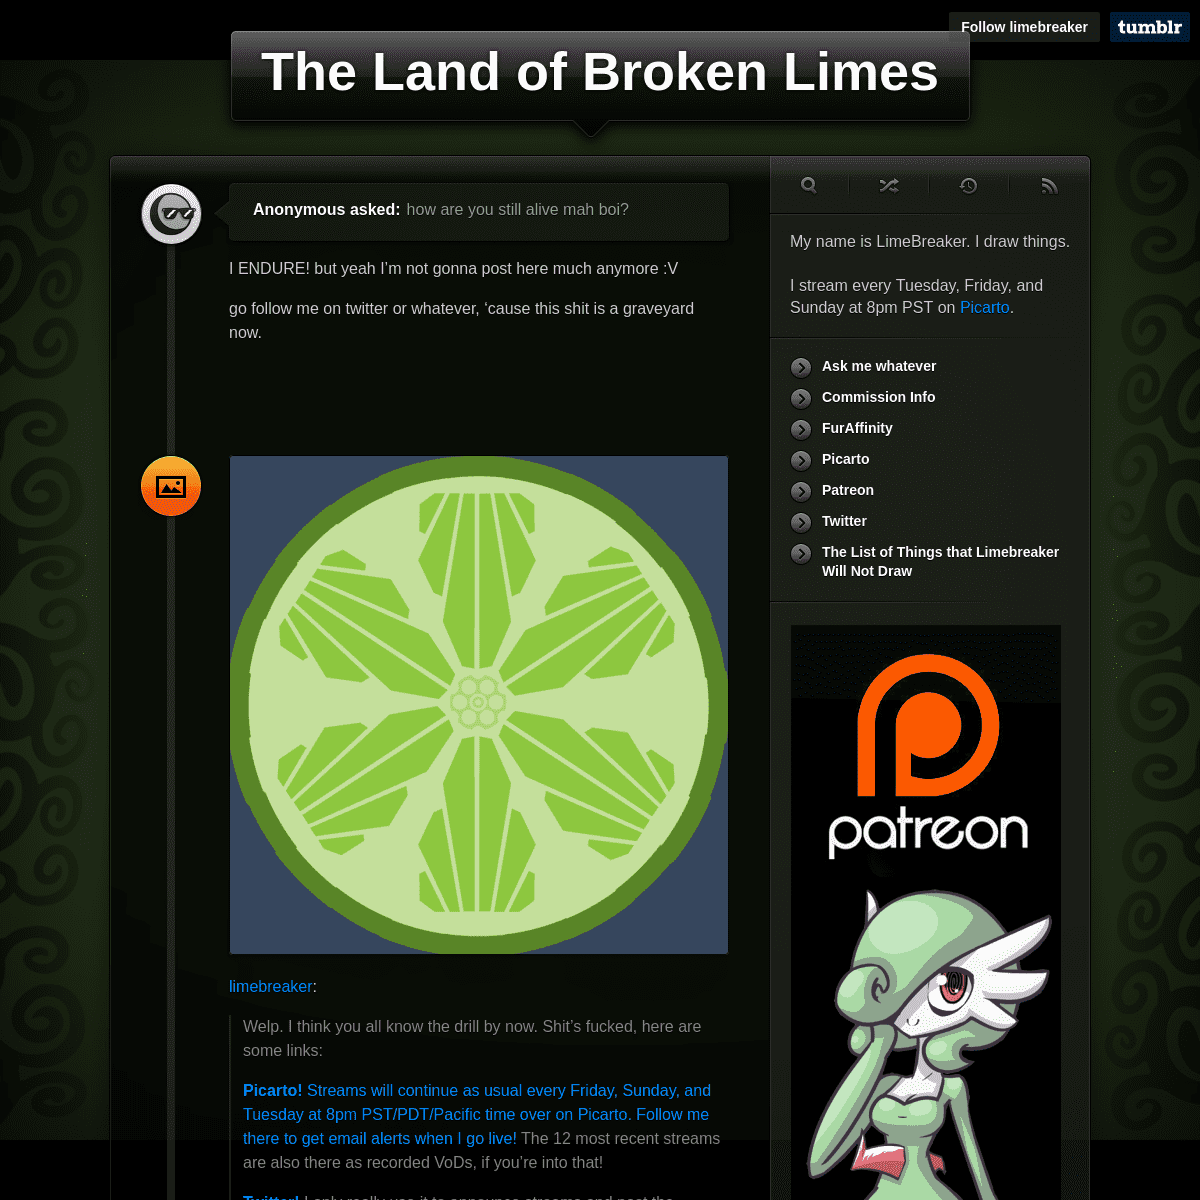 The Land of Broken Limes